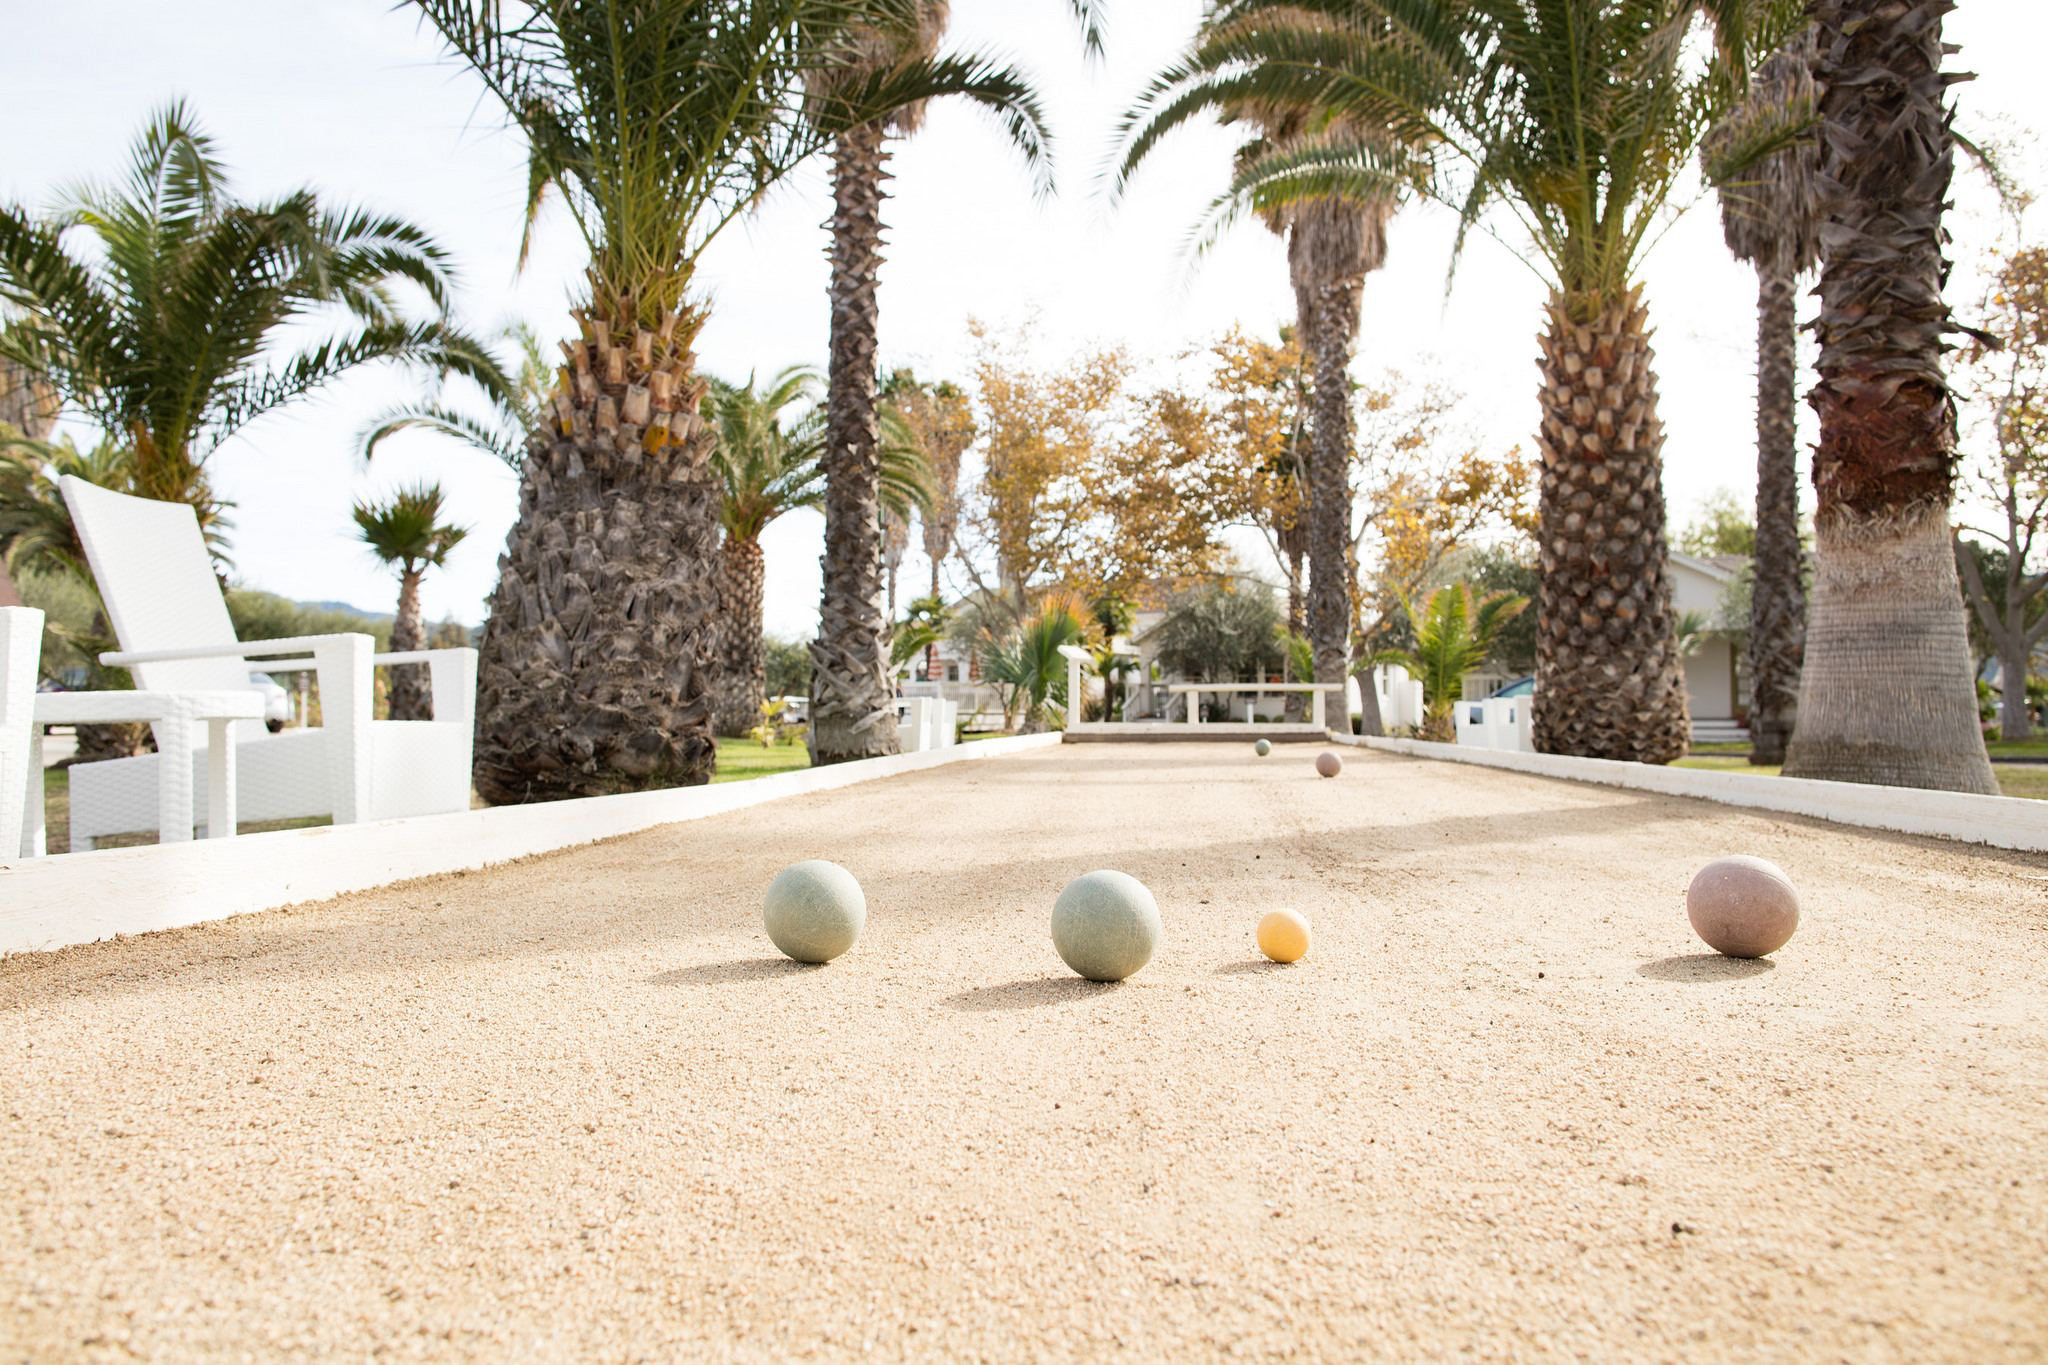 Bocce ball court for your clients this summer